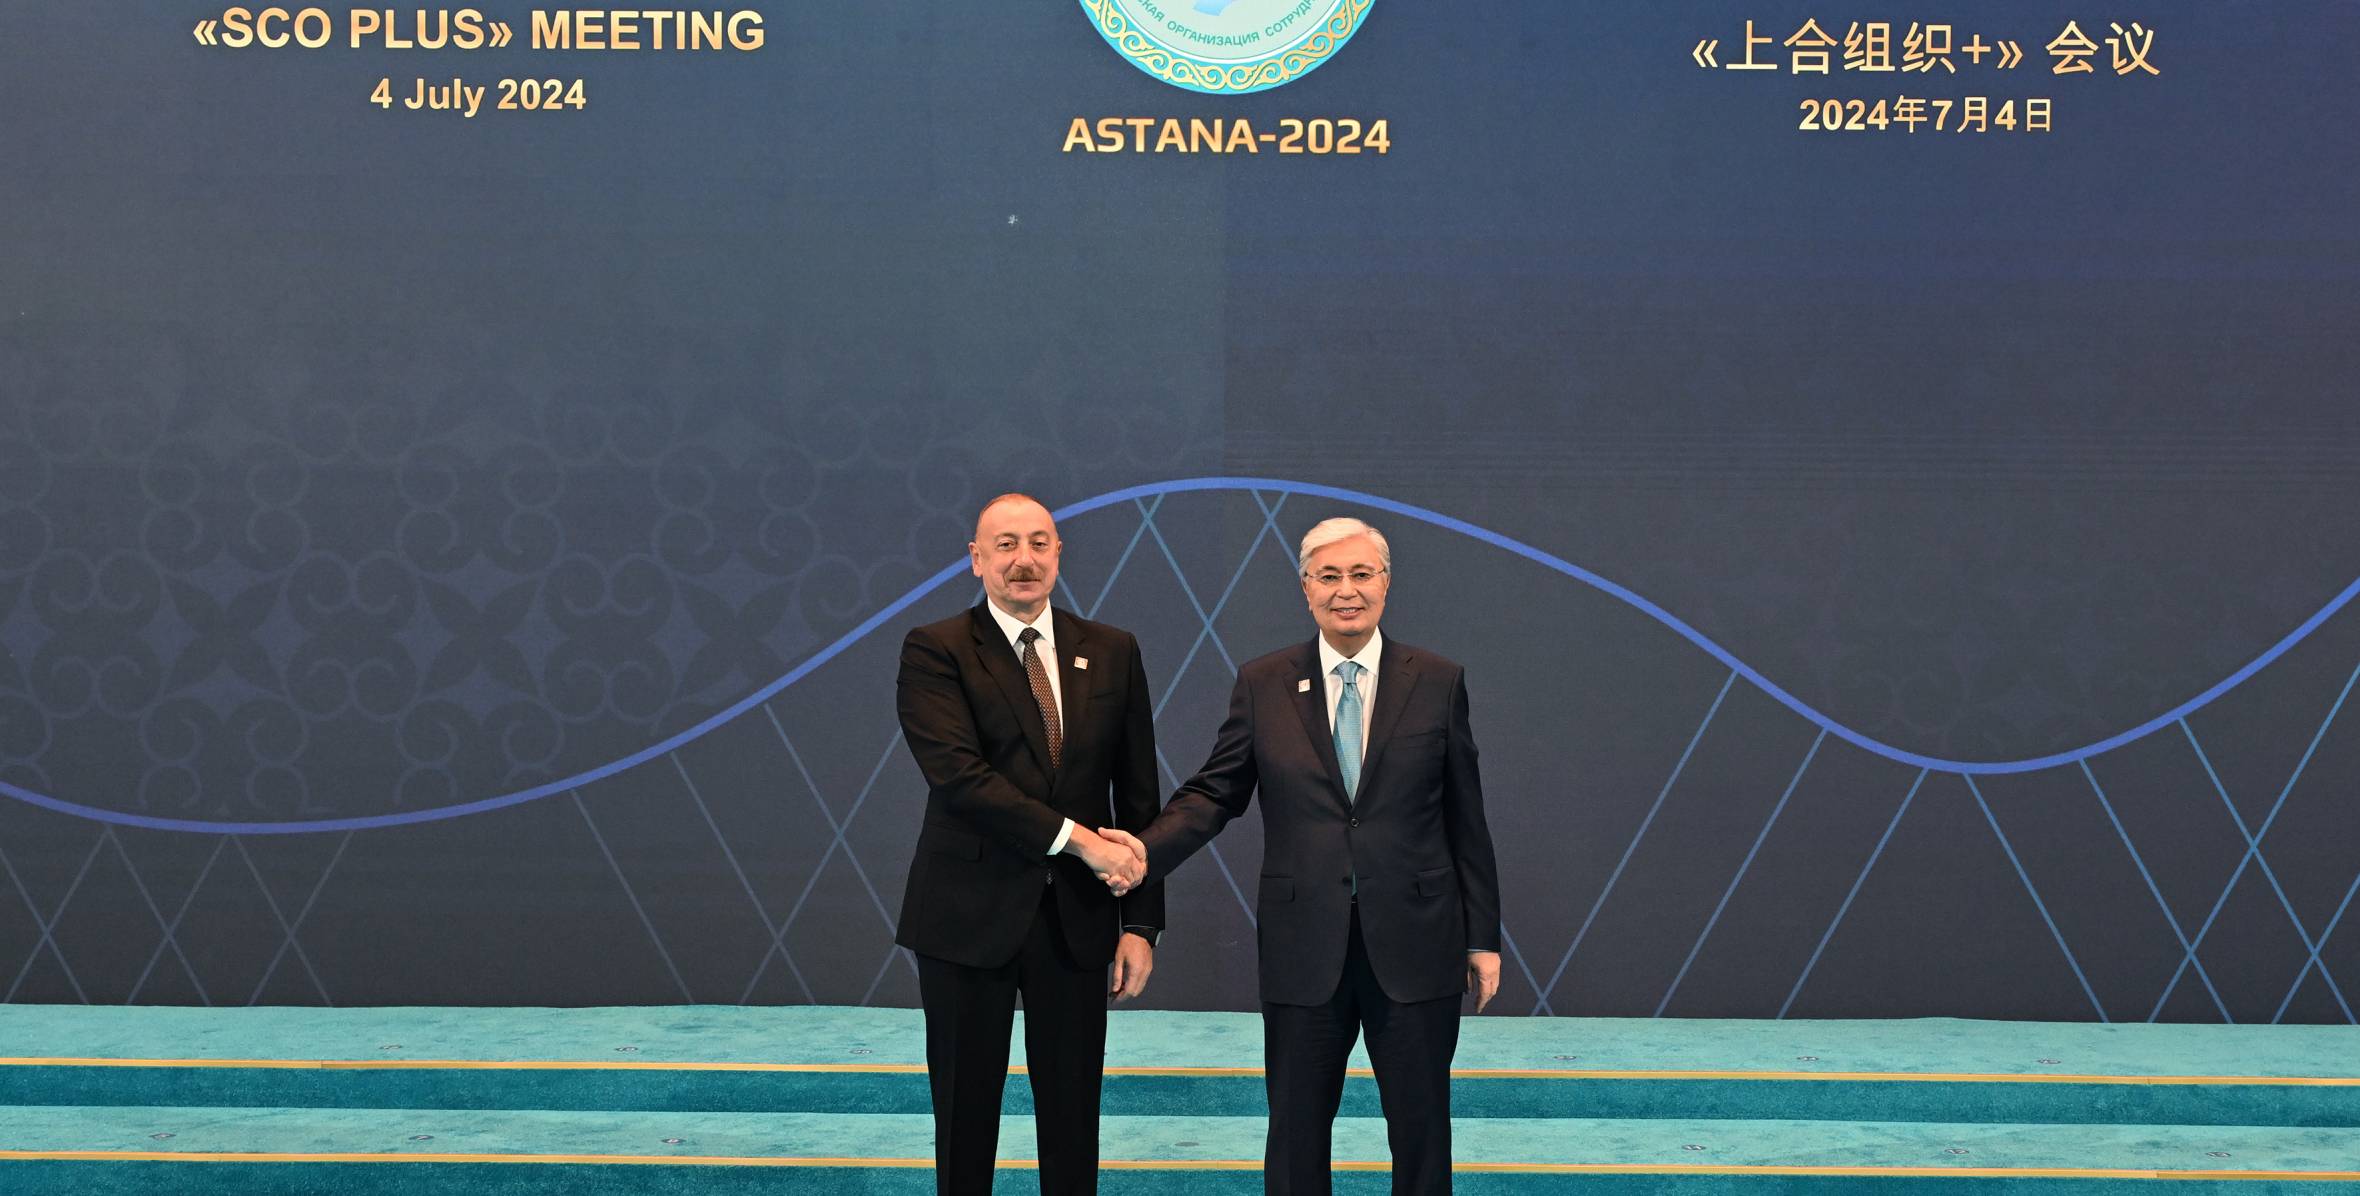 Ilham Aliyev arrived at "Palace of Independence” to attend "SCO plus" format meeting in Astana